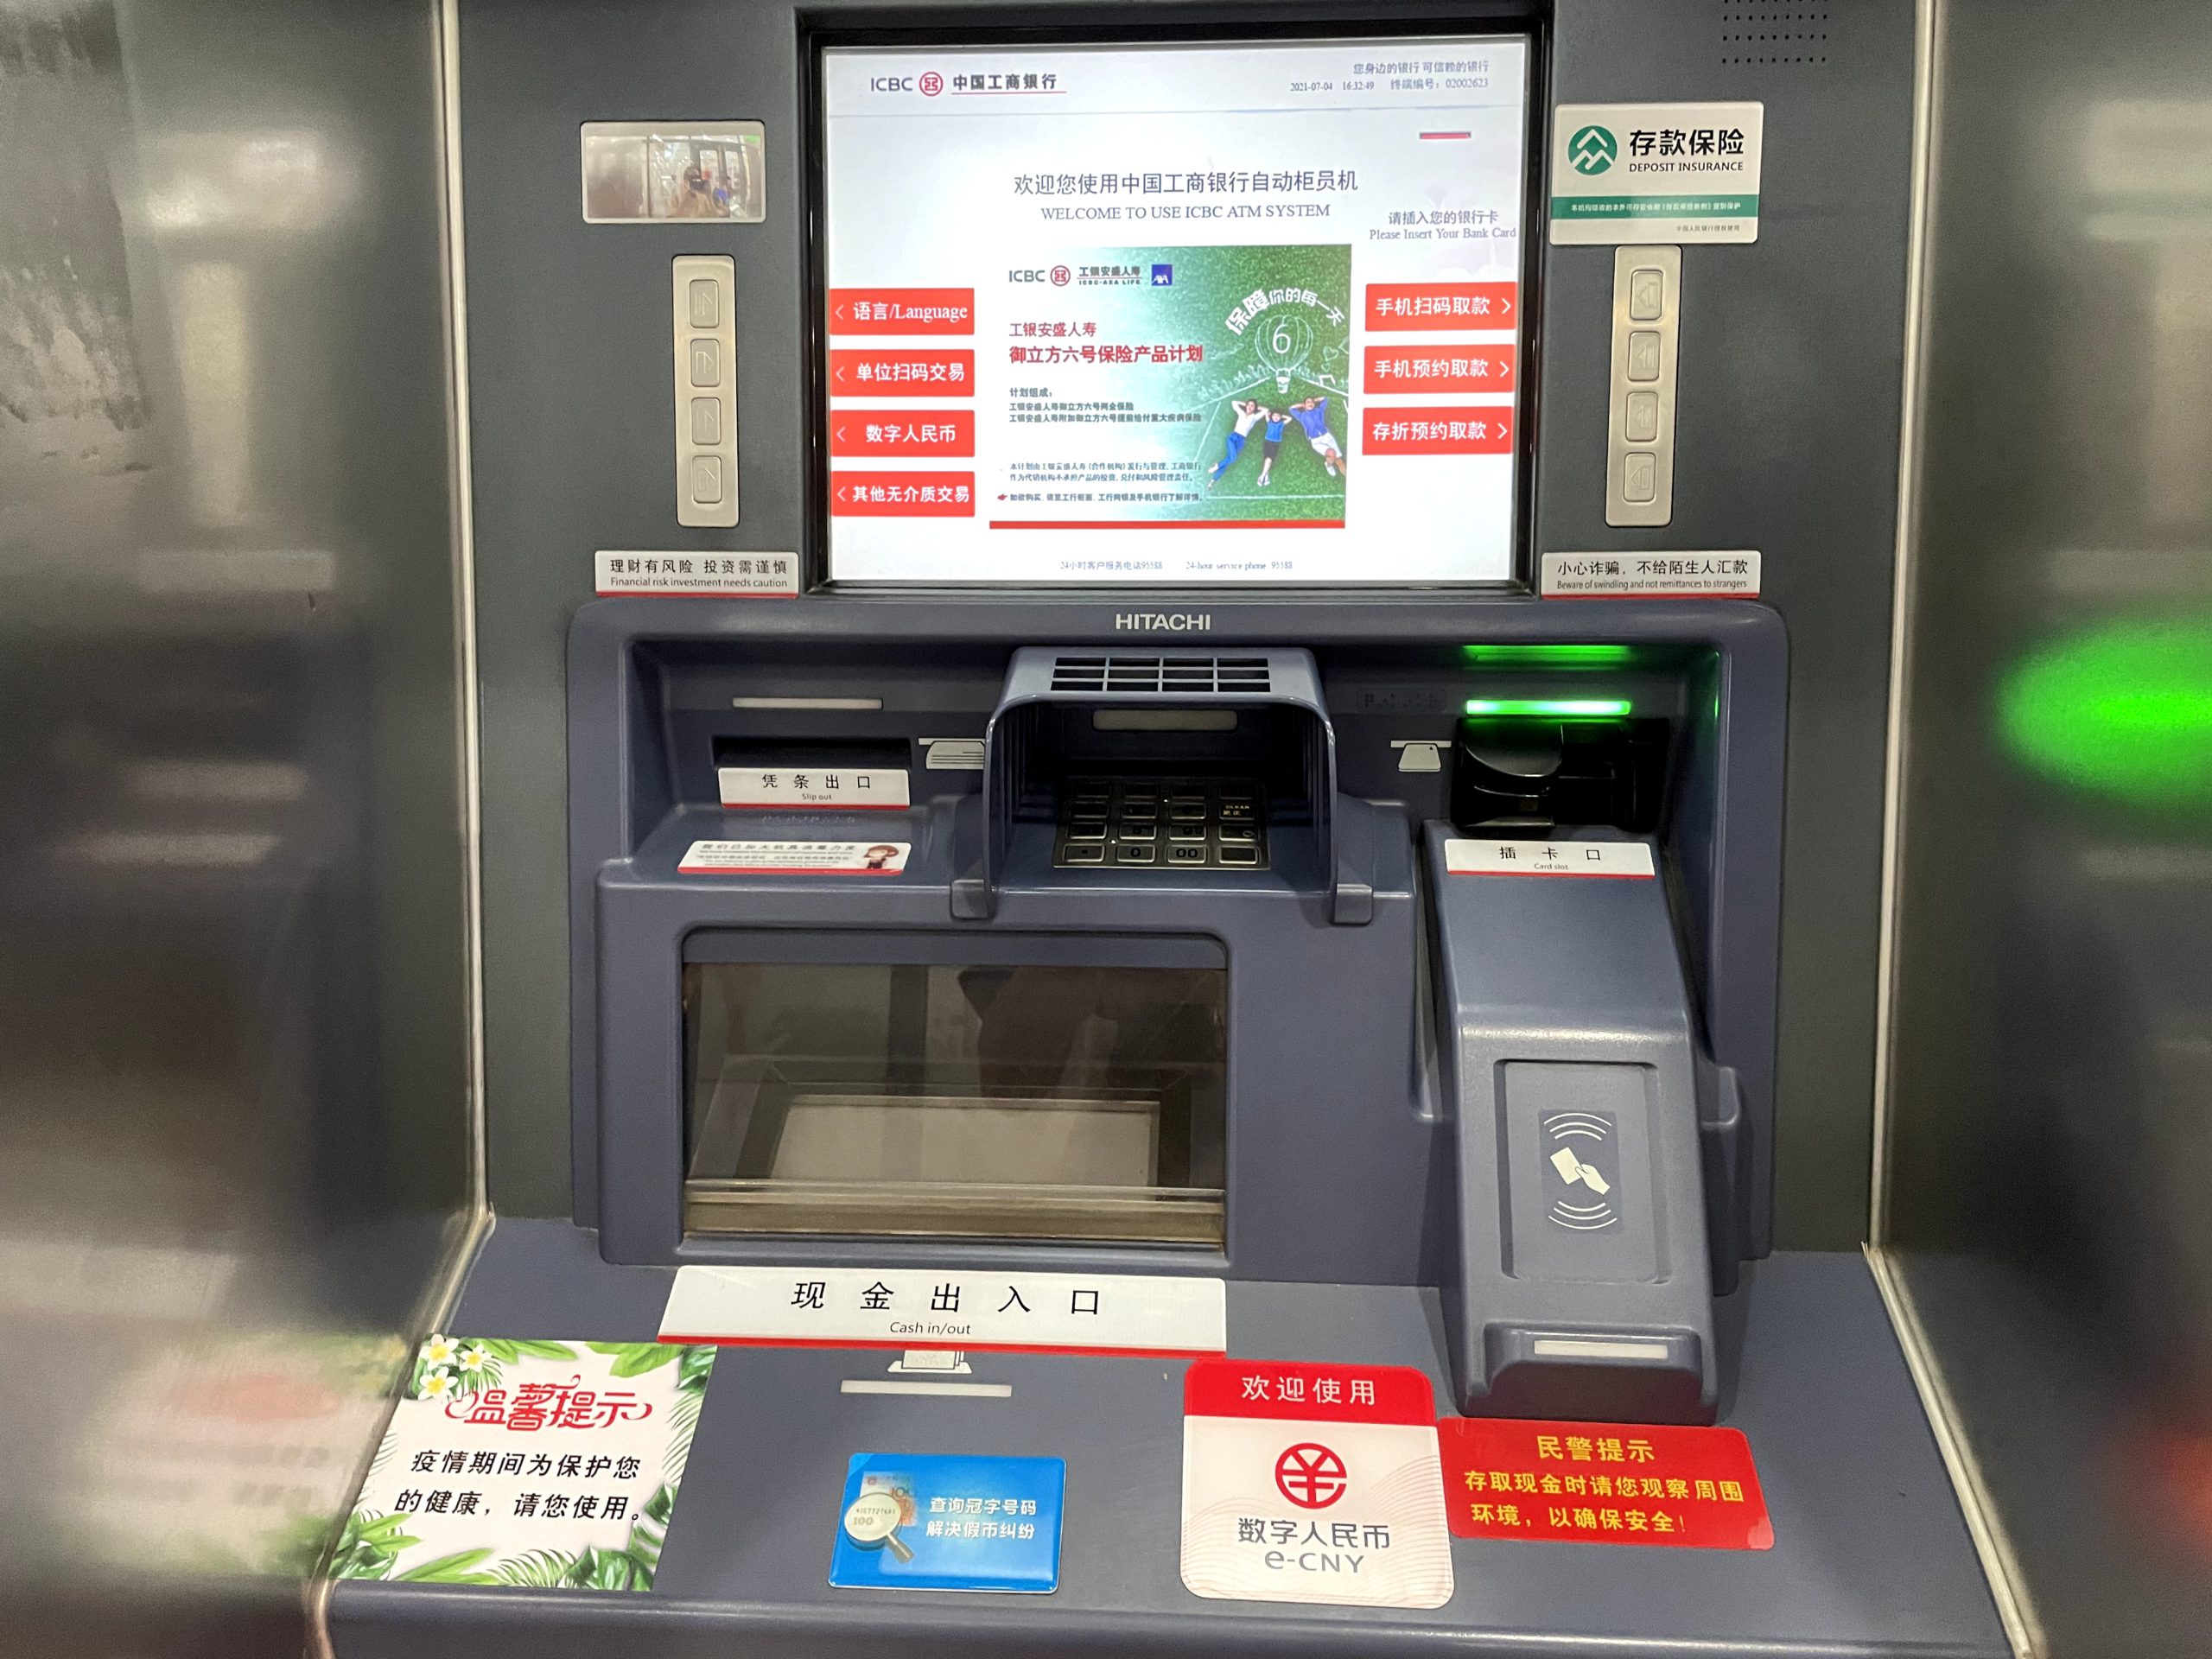 A sign for e-CNY disbursement (second from right, bottom of frame) can be seen posted on ICBC ATMs in the city—indicating cash to digital yuan exchanges are featured at these ATMs. Photo by KrASIA.